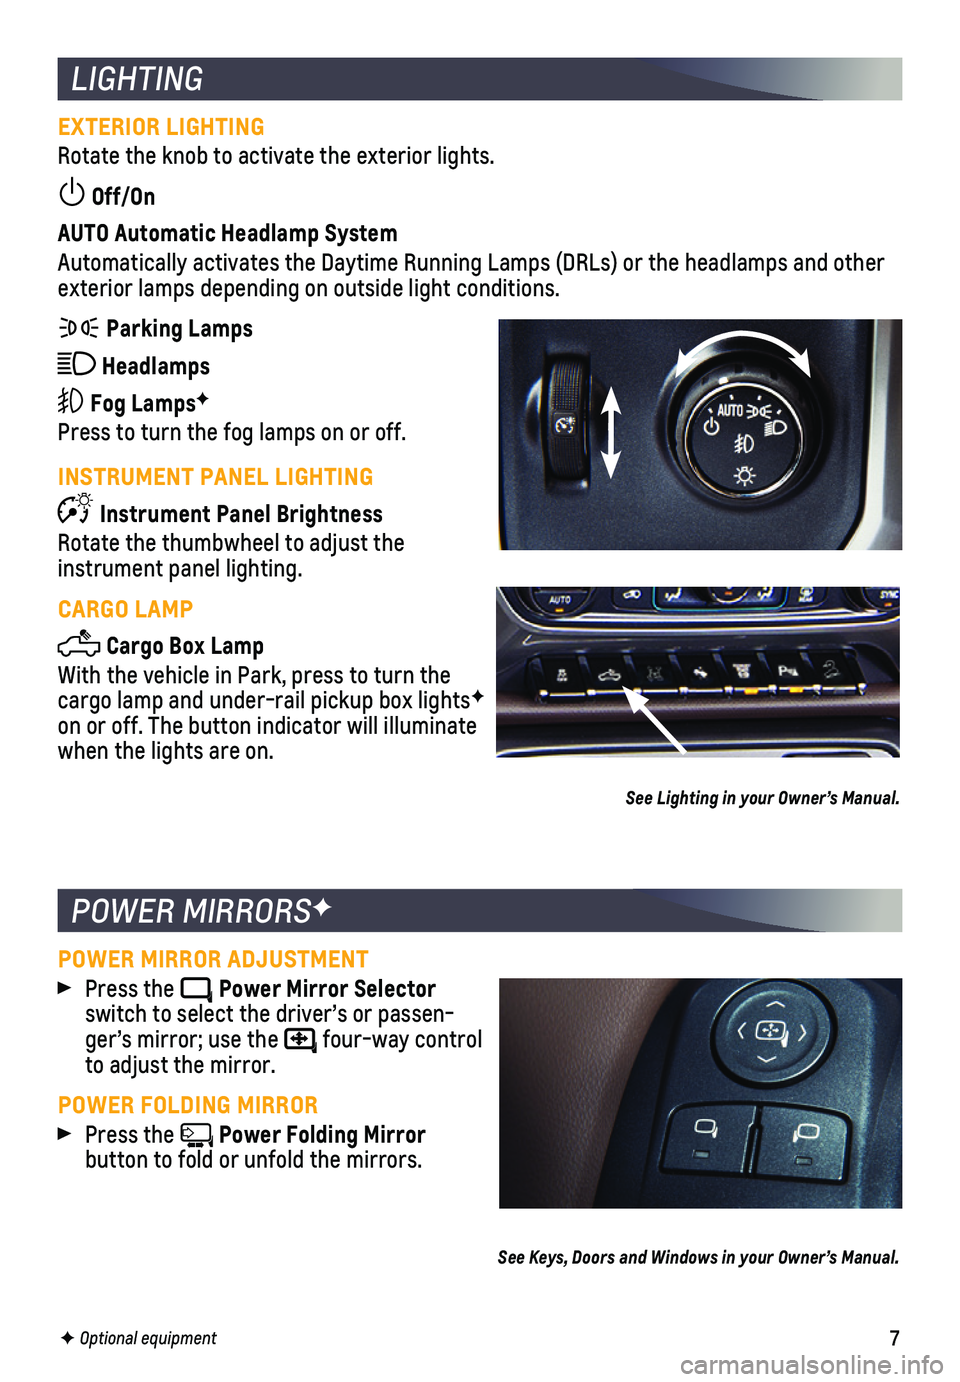 CHEVROLET SILVERADO 1500 LD 2019  Get To Know Guide 7
EXTERIOR LIGHTING
Rotate the knob to activate the  exterior lights.
 Off/On 
AUTO Automatic Headlamp System
Automatically activates the Daytime Running Lamps (DRLs) or the headla\
mps and other ext